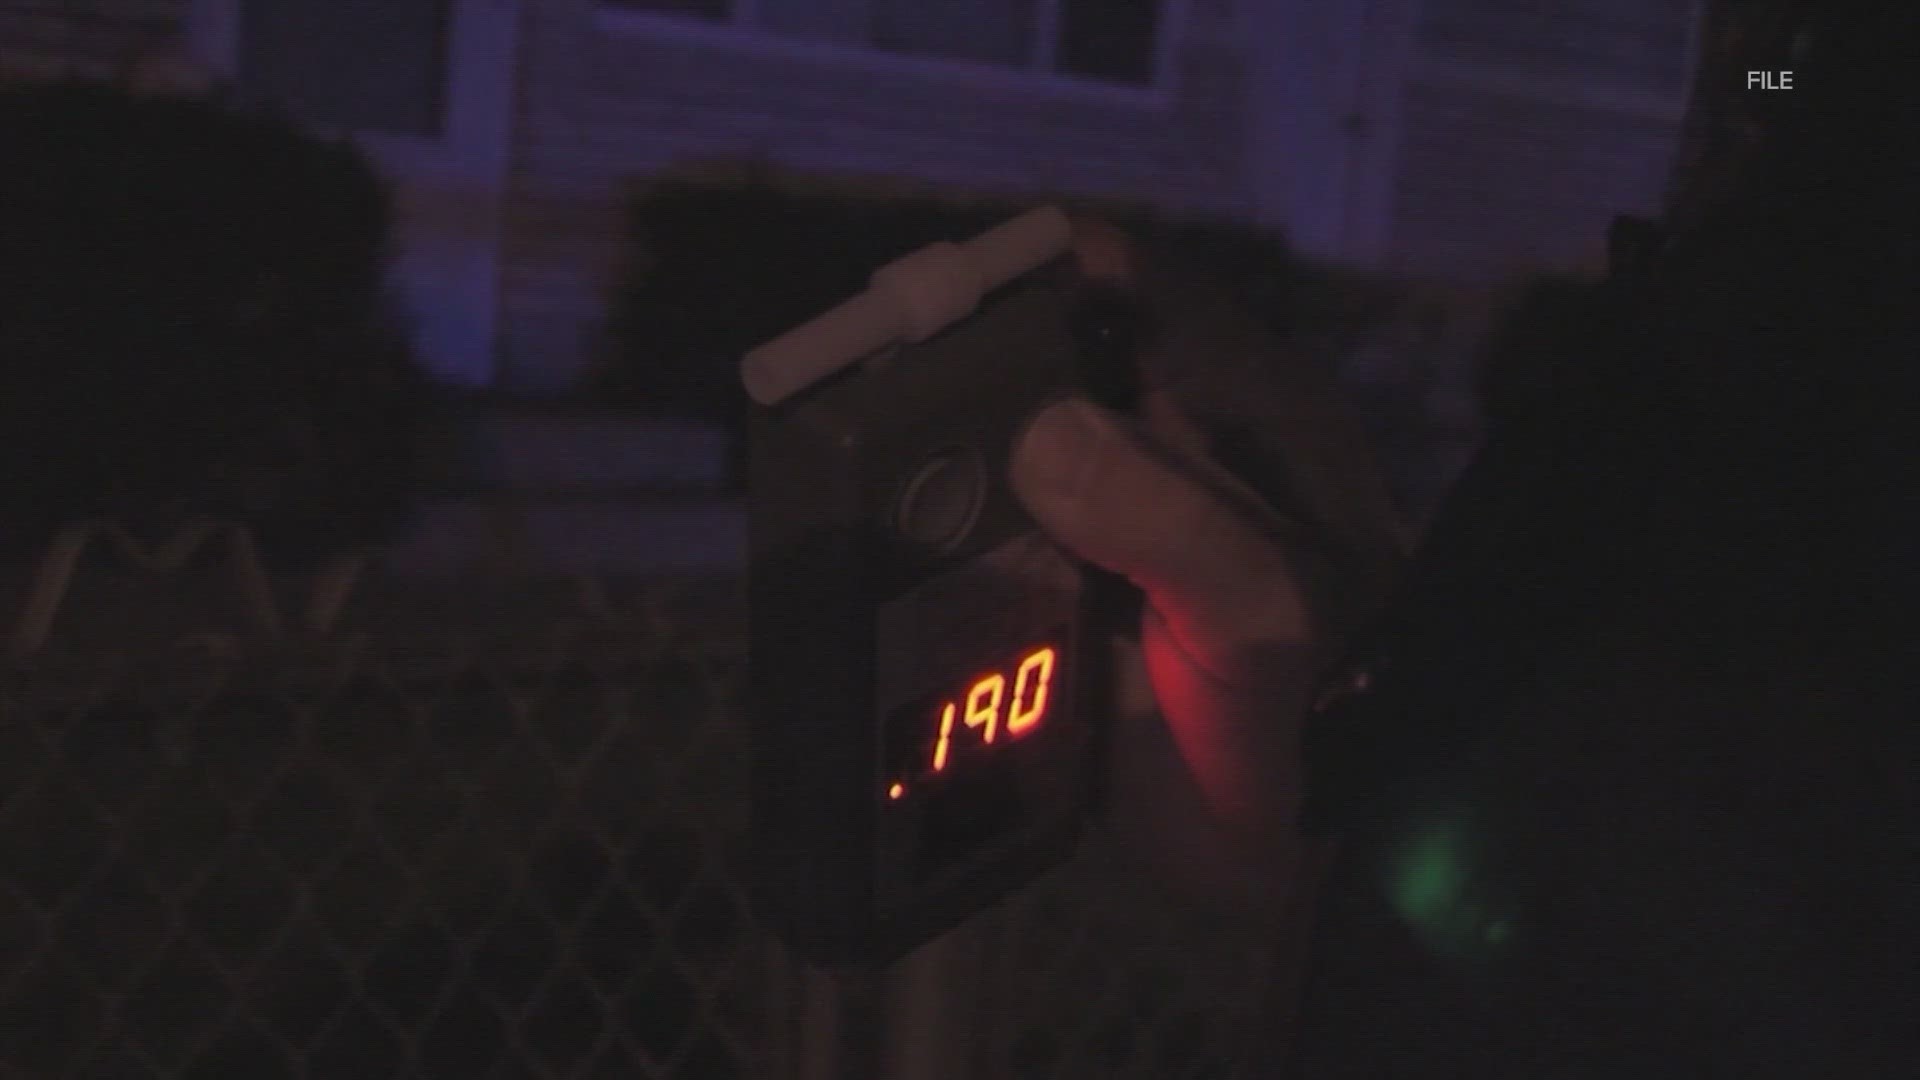 The case could have had major implications for thousands of DUI cases due to law enforcement agencies statewide using the breathalyzer machine.